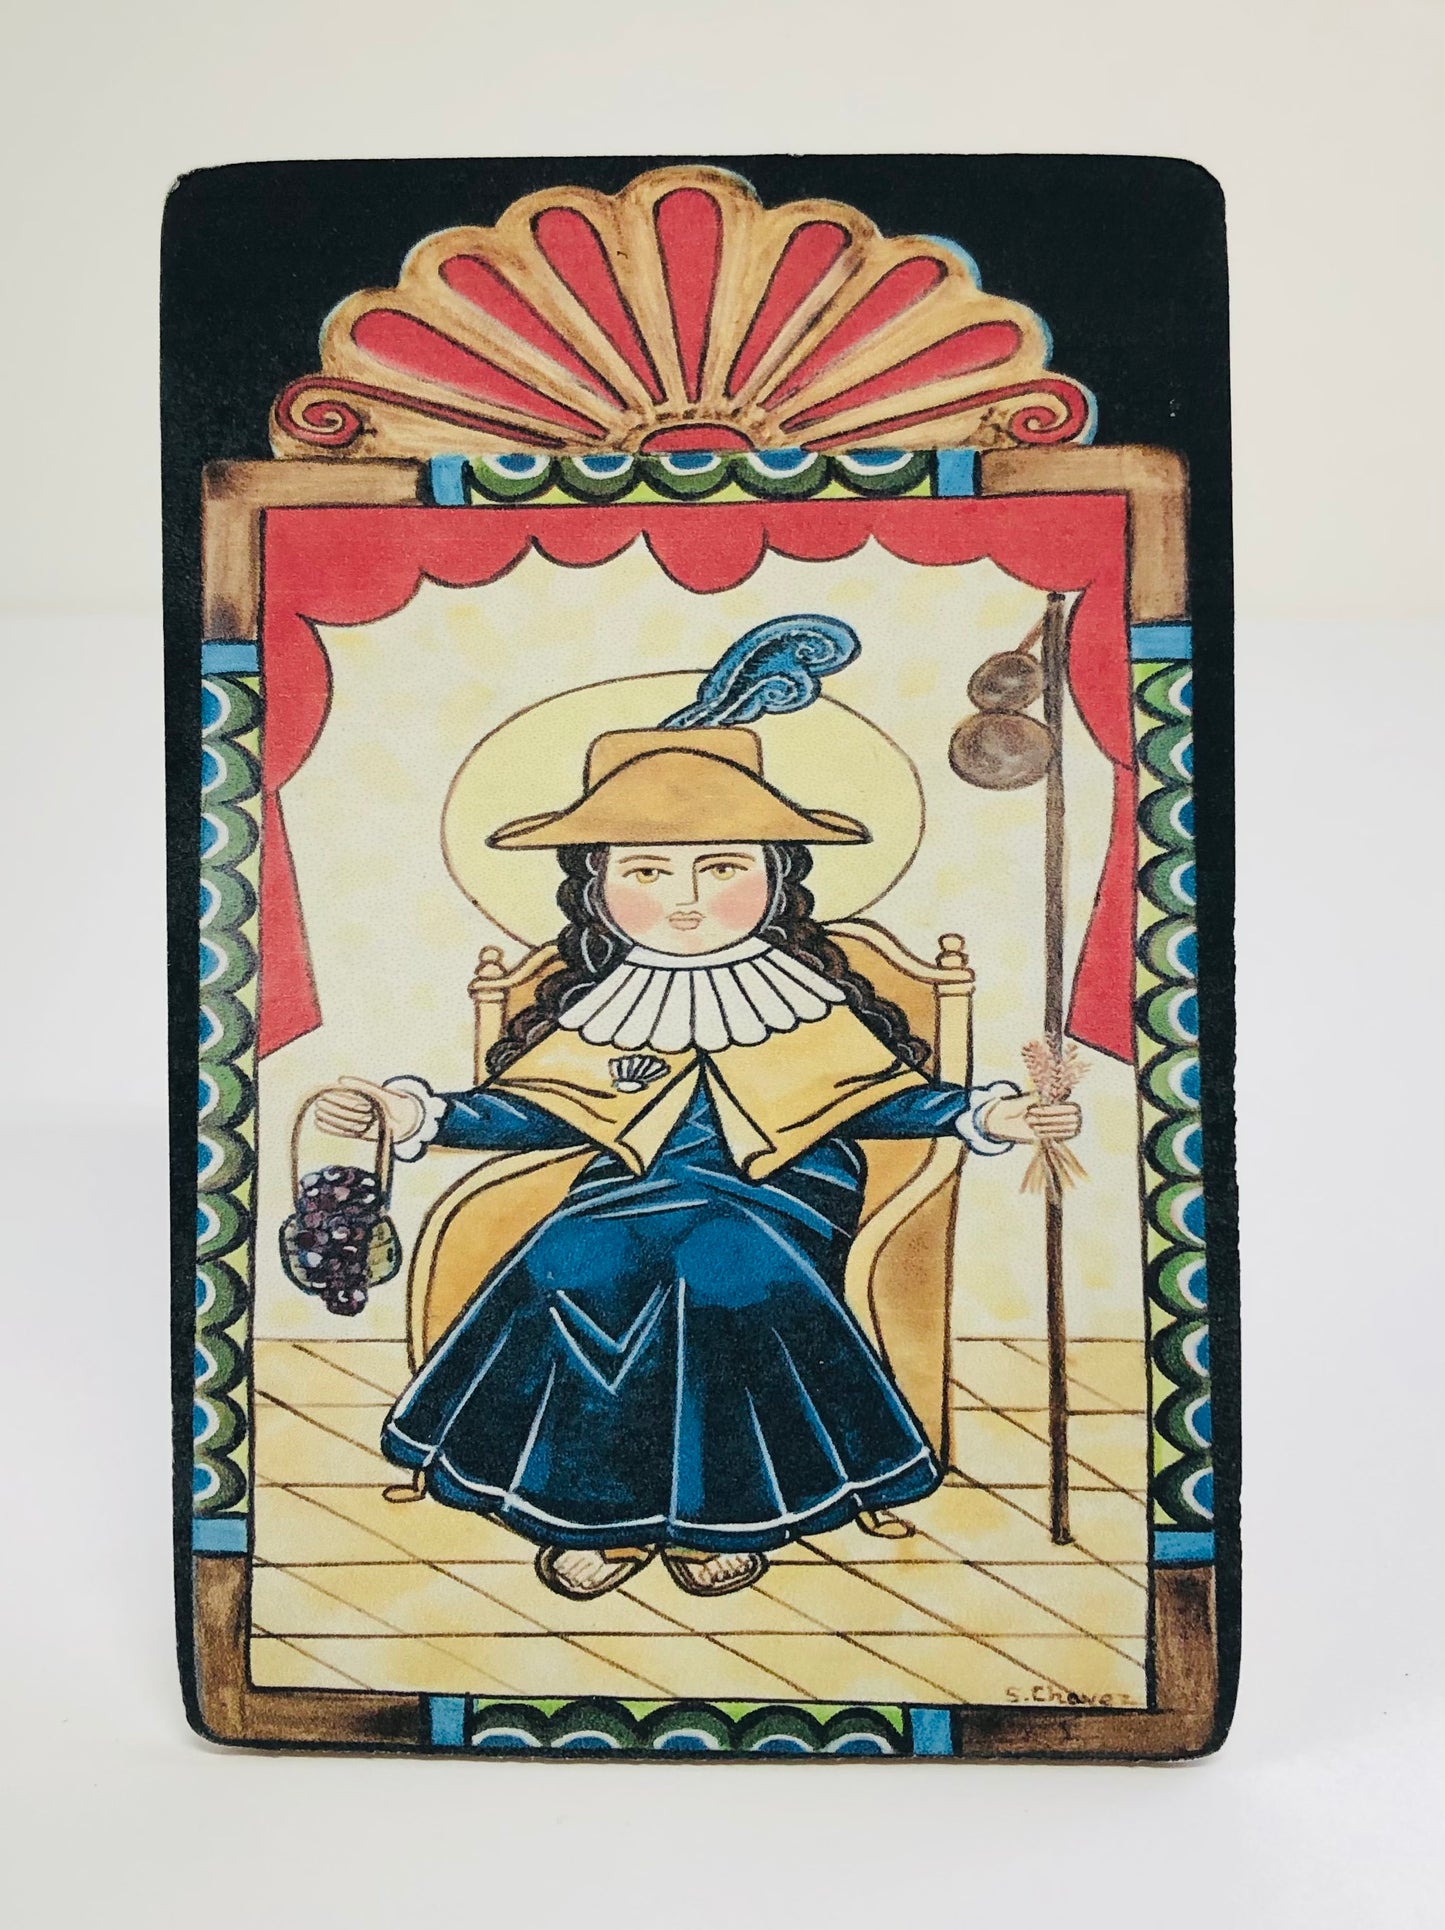 San Pasqual  Patron of cooks. chefs, and kitchens.  Feast Day: May 17th   Retablo is a devotional painting using iconography derived from traditional Catholic church art.    Replica is a duplicate of the original artwork.  3.5” X 5” digital photo with protectant on a wood panel.       Artist: Shawna Lee Chavez